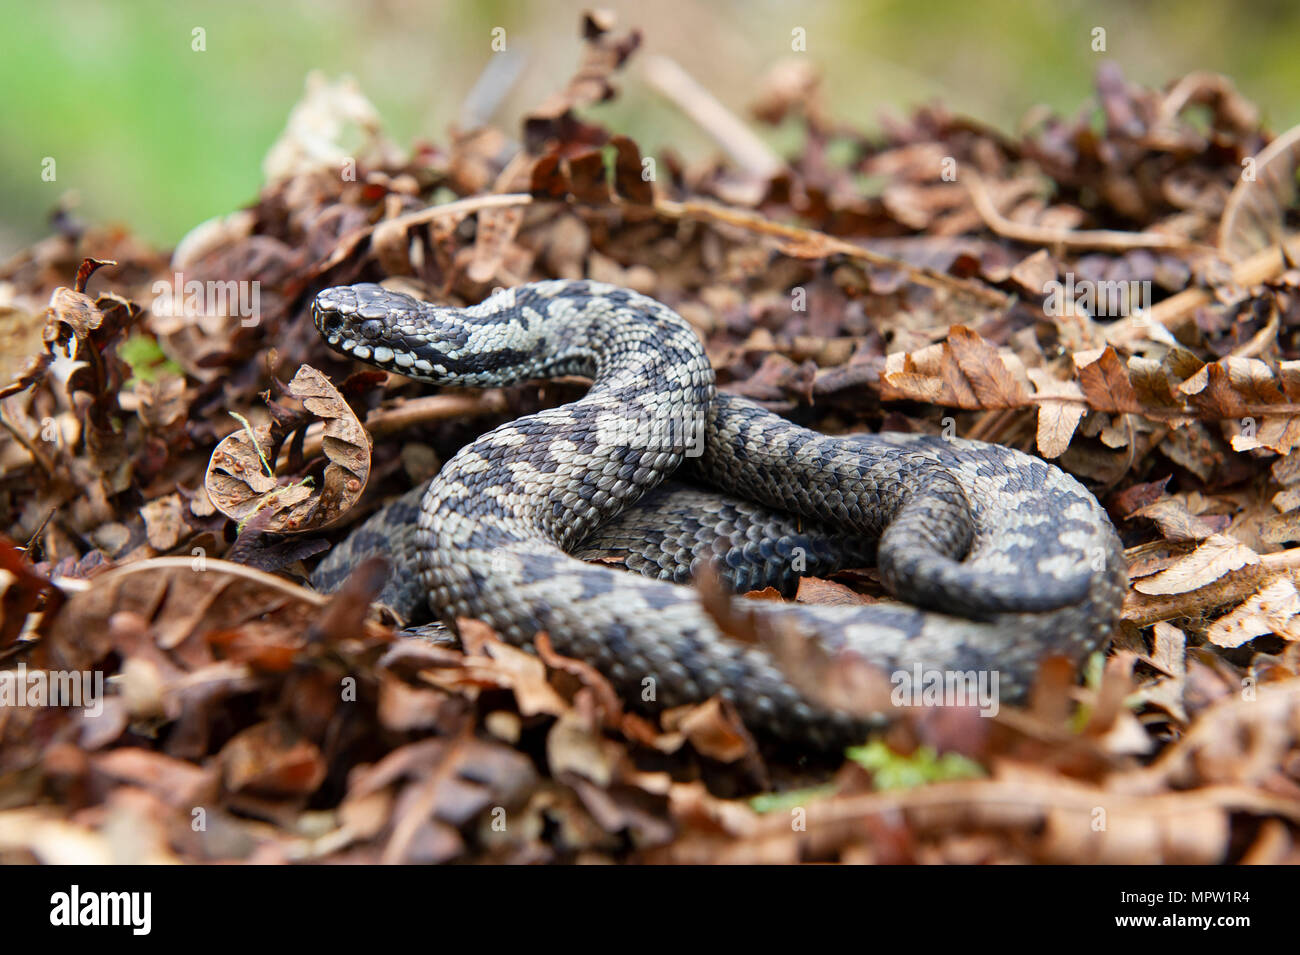 An Adder (Vipera berus), Britains only poisonous snake curled up on a leaf pile. Stock Photo